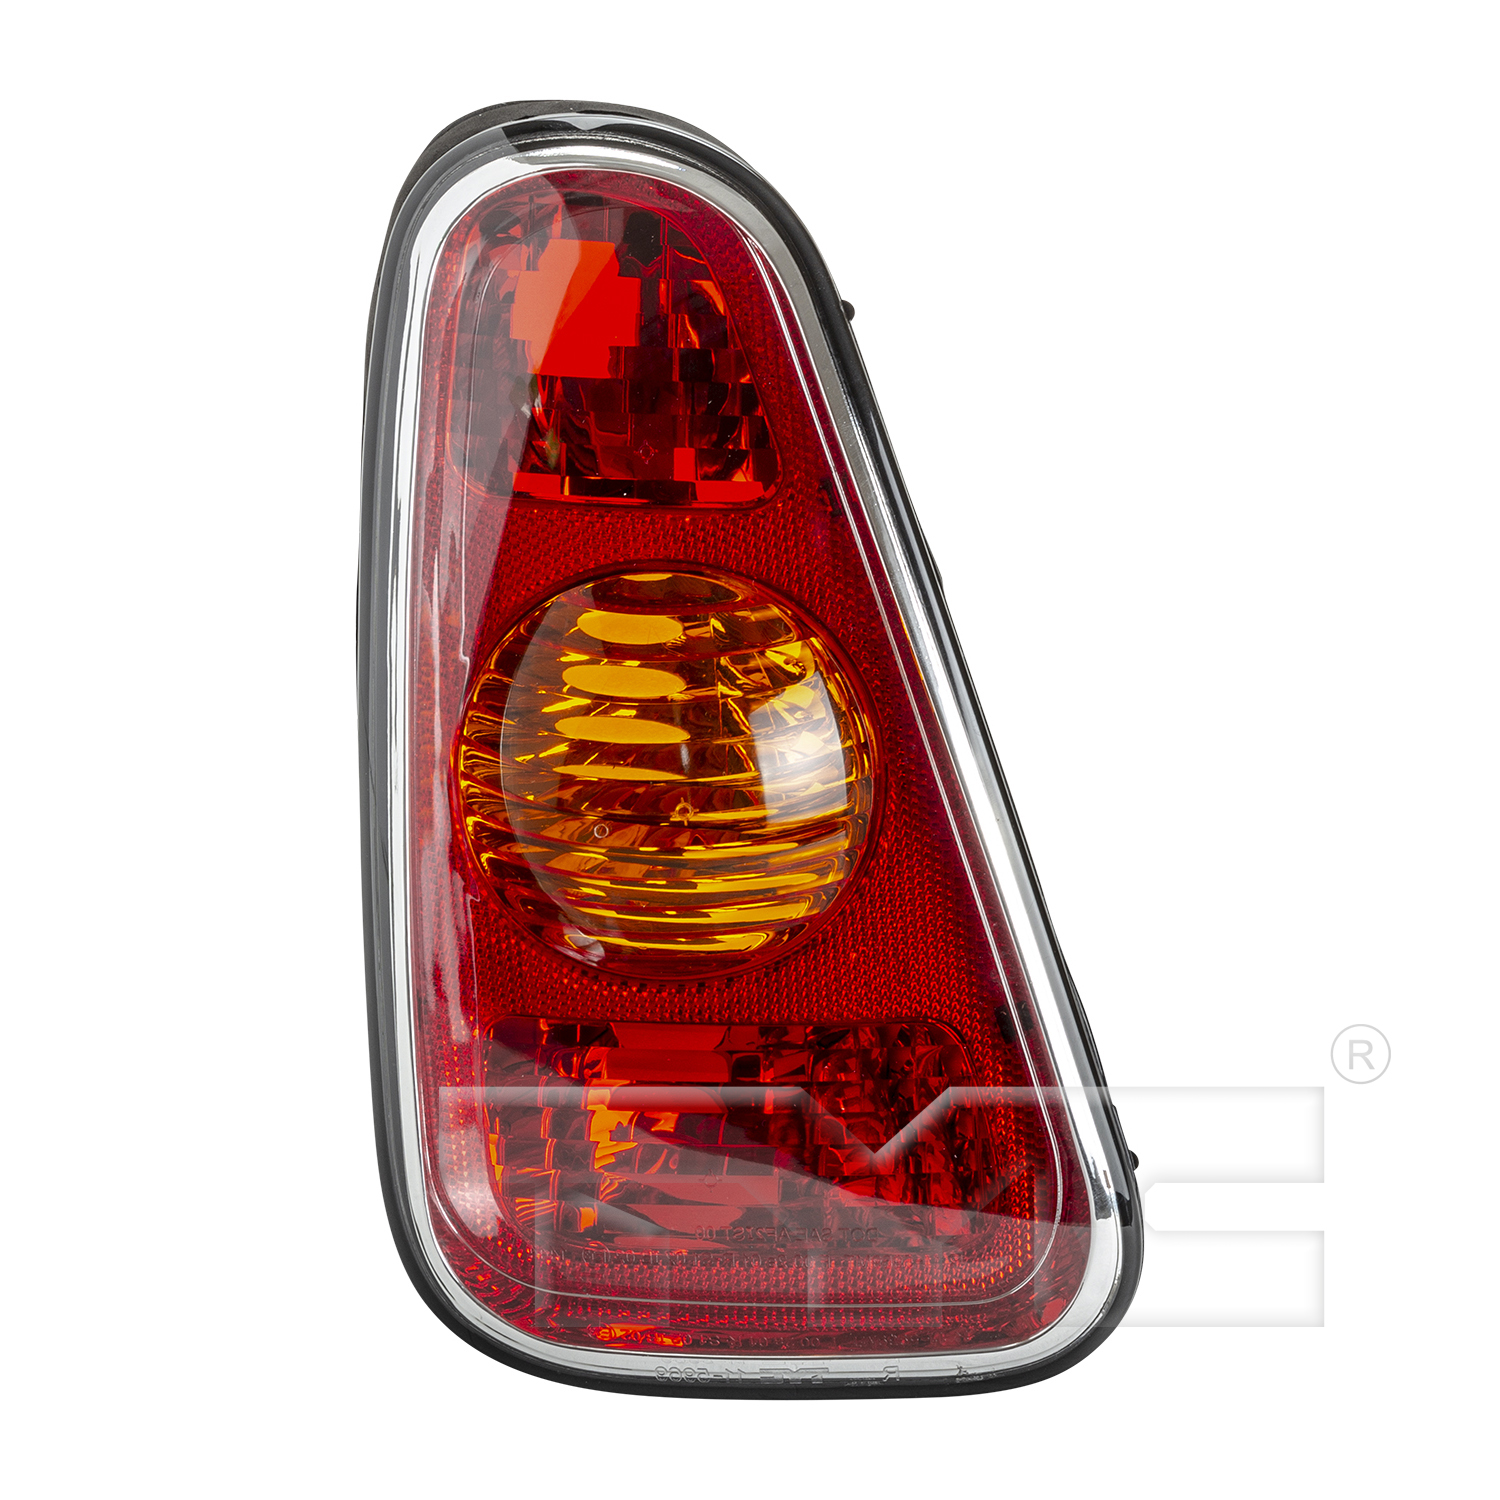 Aftermarket TAILLIGHTS for MINI - COOPER, COOPER,02-06,LT Taillamp assy